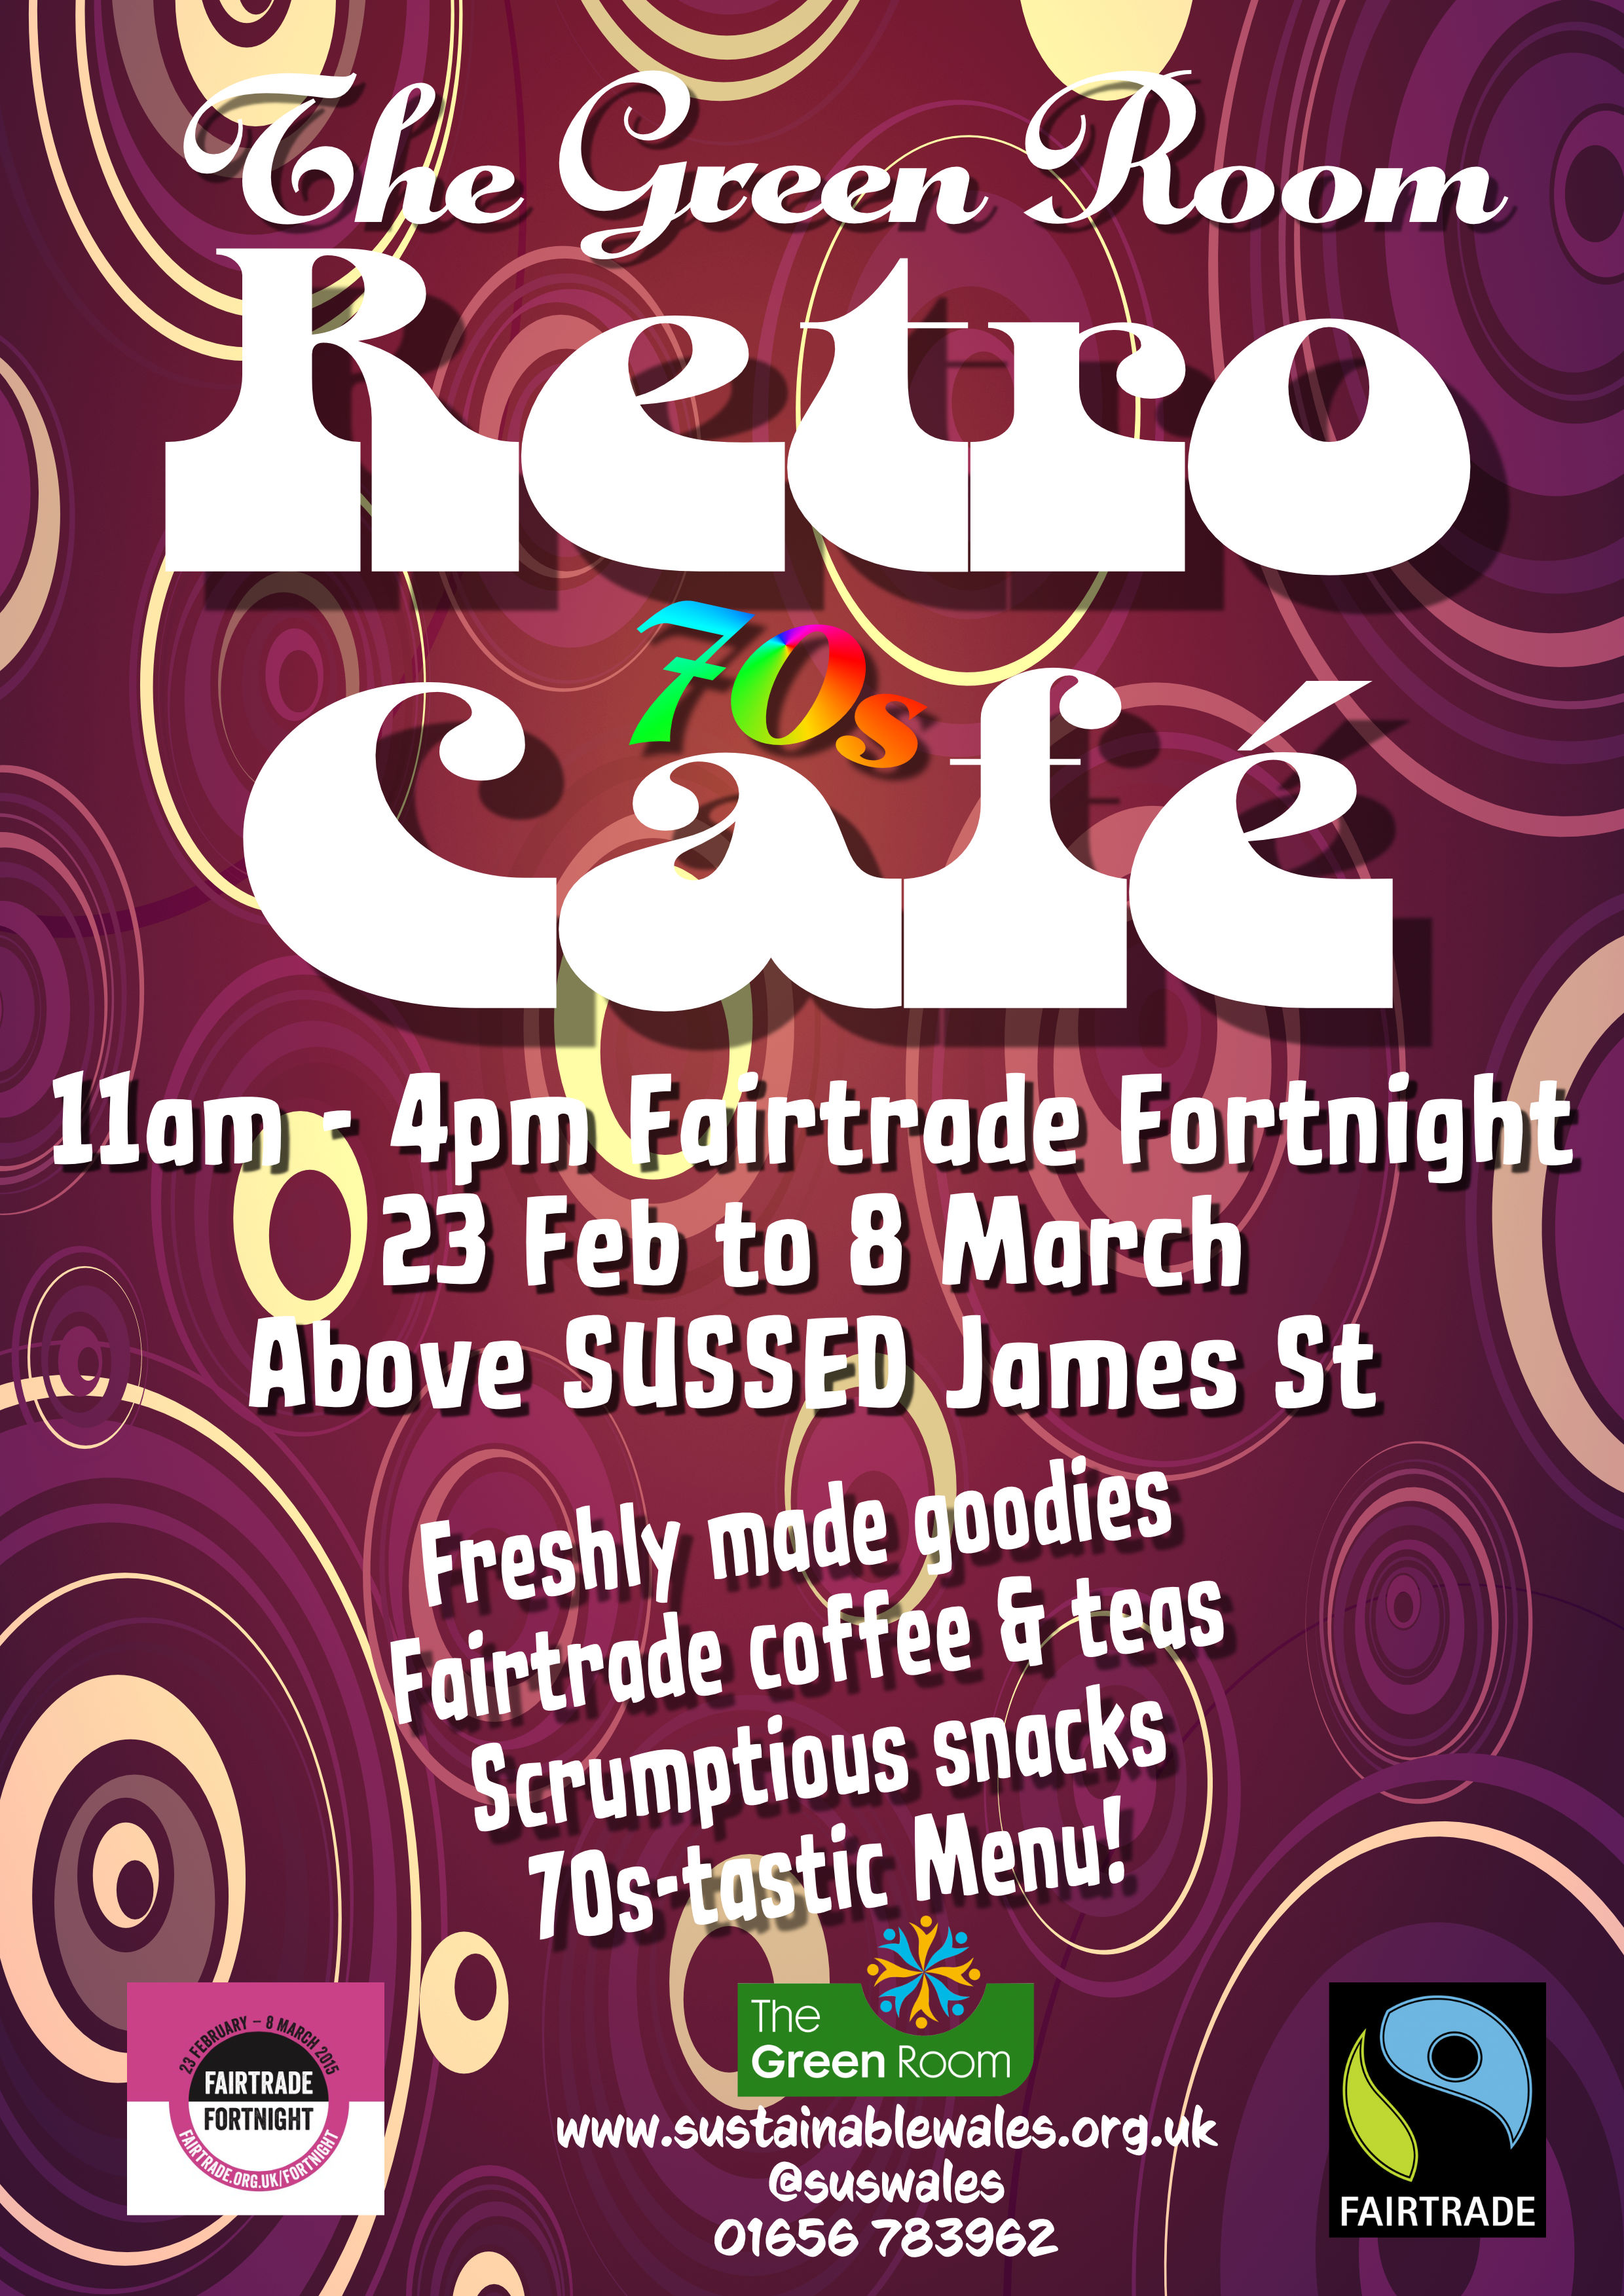 Retro Cafe Seventies Style Menu At The Green Room For